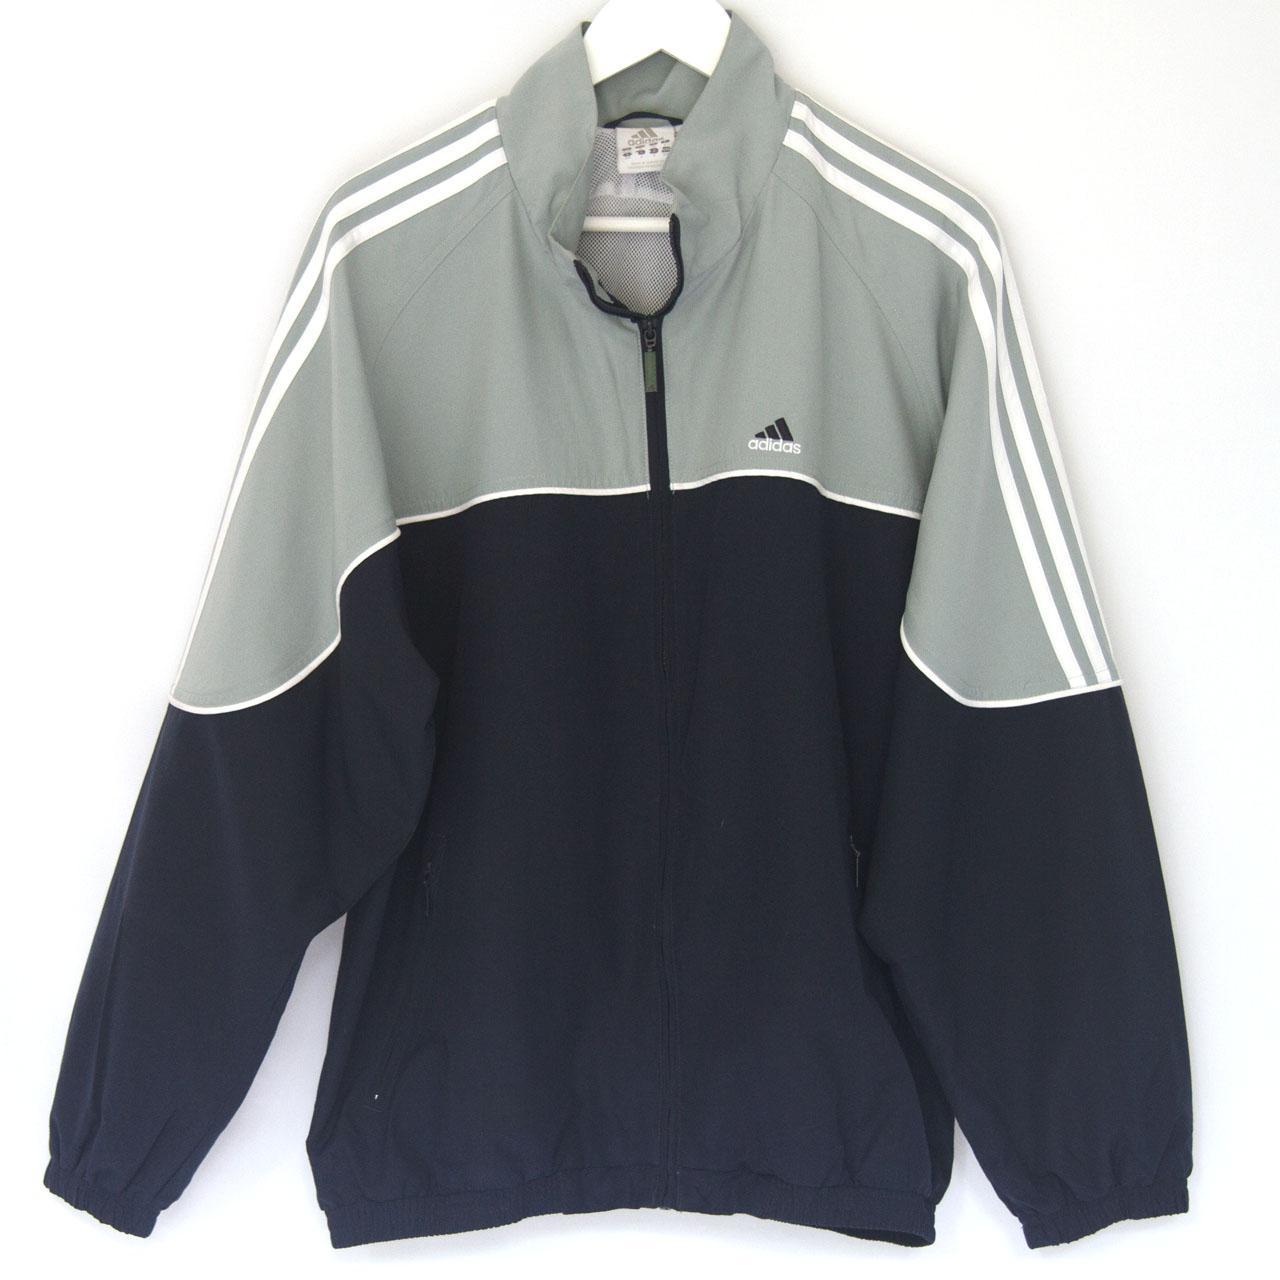 Grey and Blue Adidas Track Top M - Depop